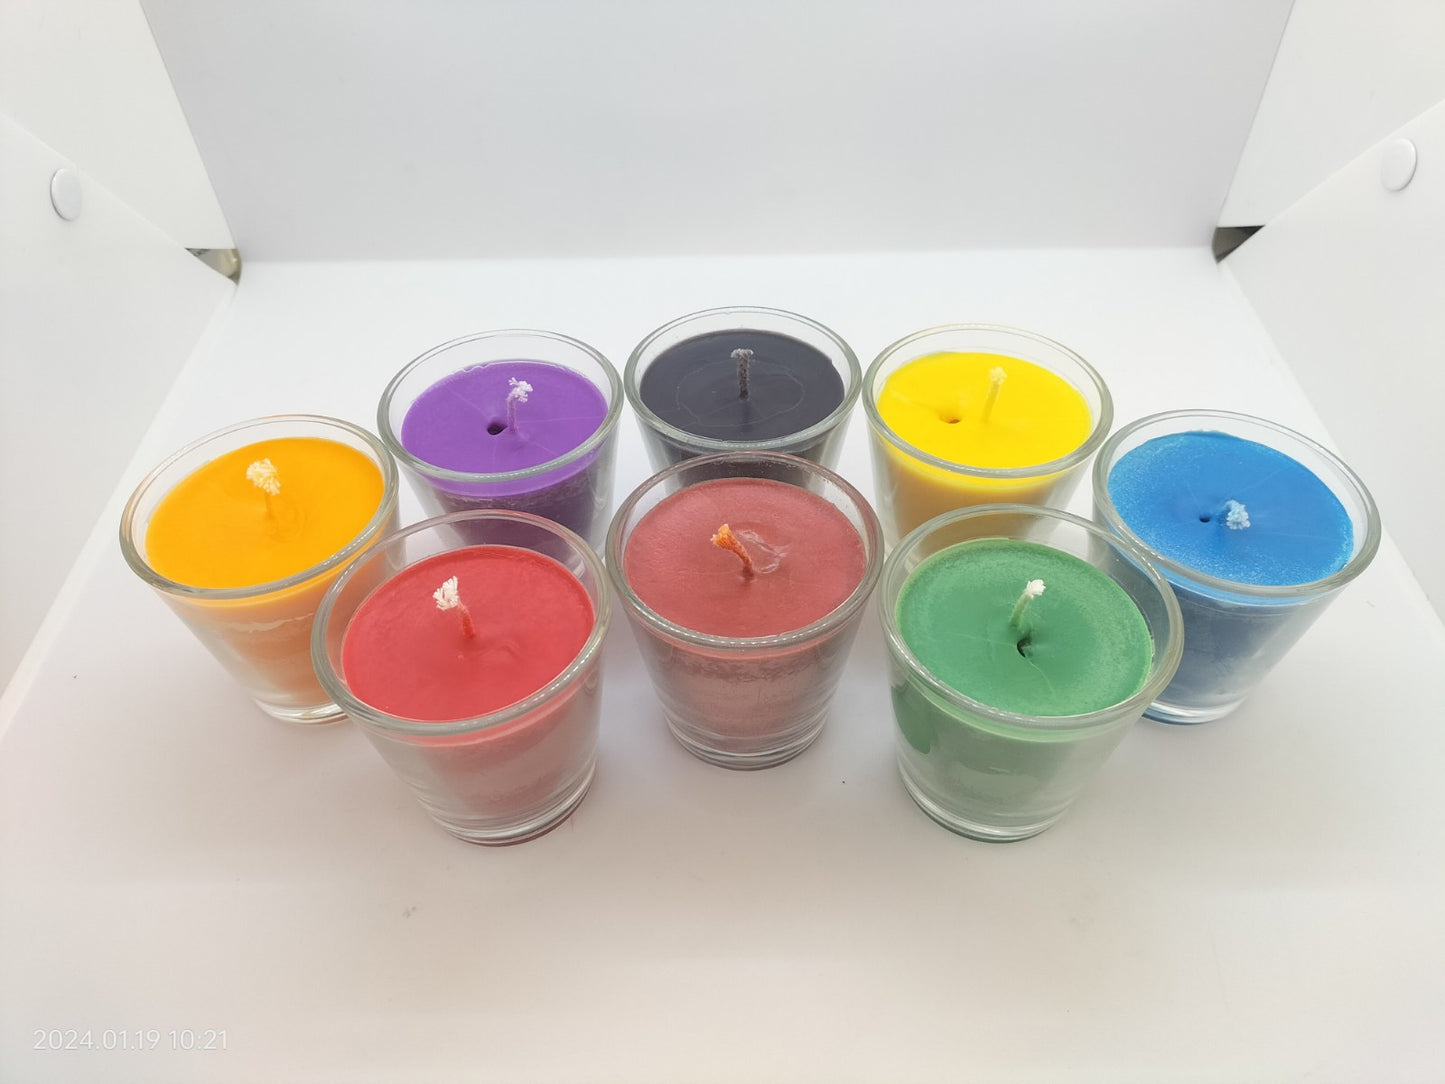 Cast candles color of your choice